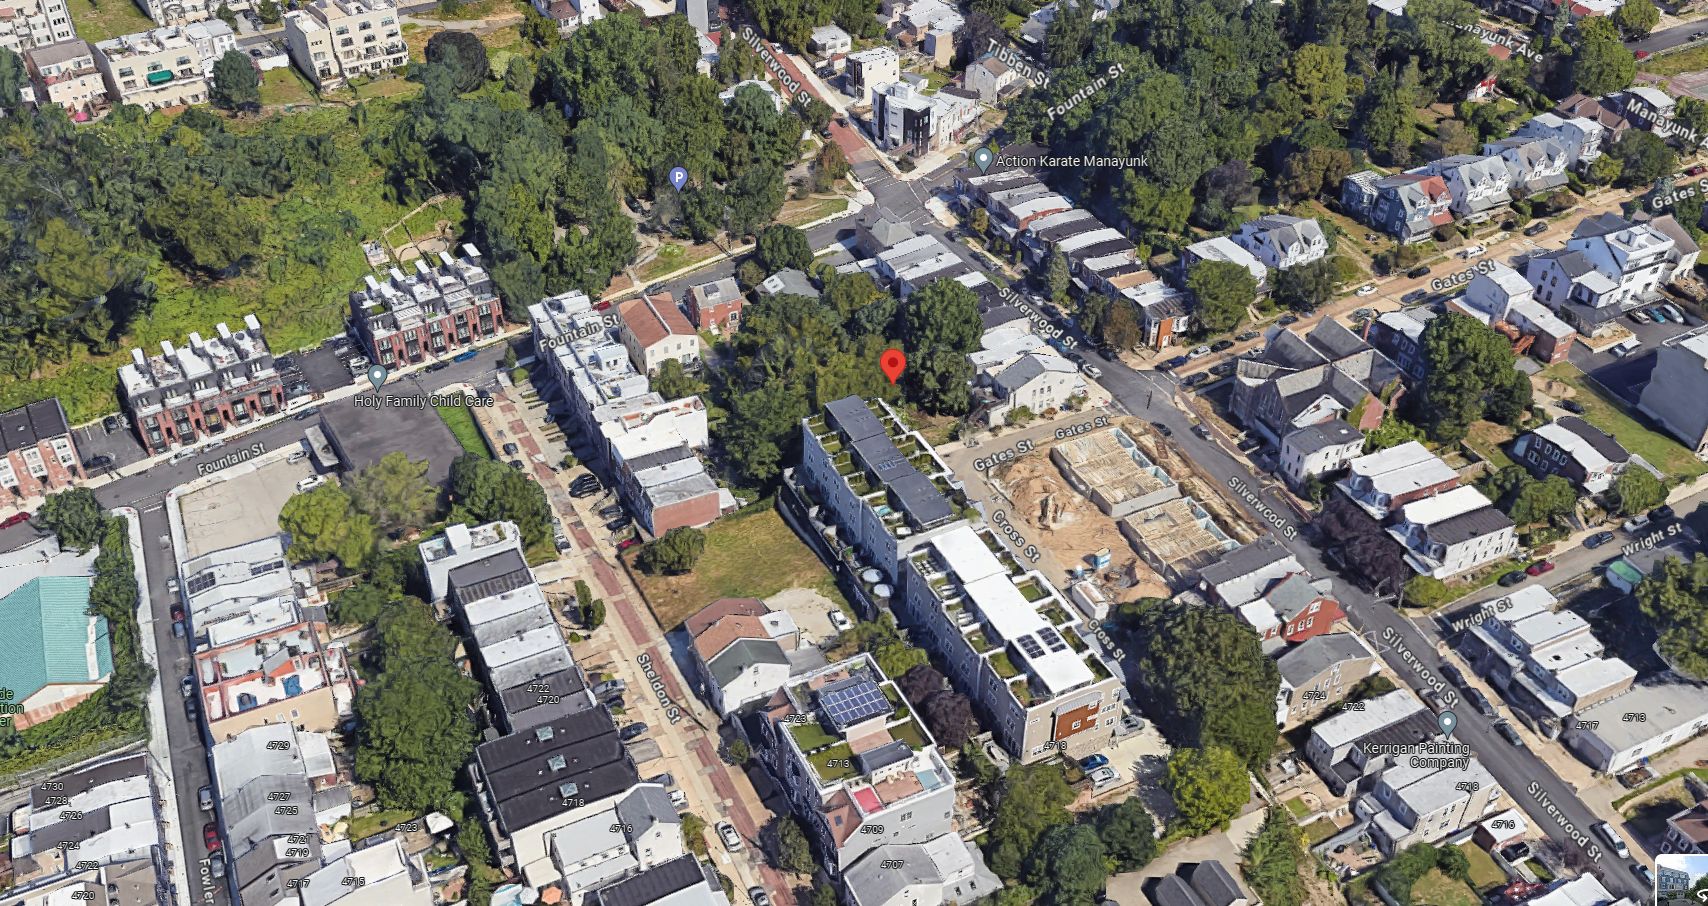 250 Gates Street. Site conditions prior to redevelopment. Aerial view. Looking north. Credit: Google Maps